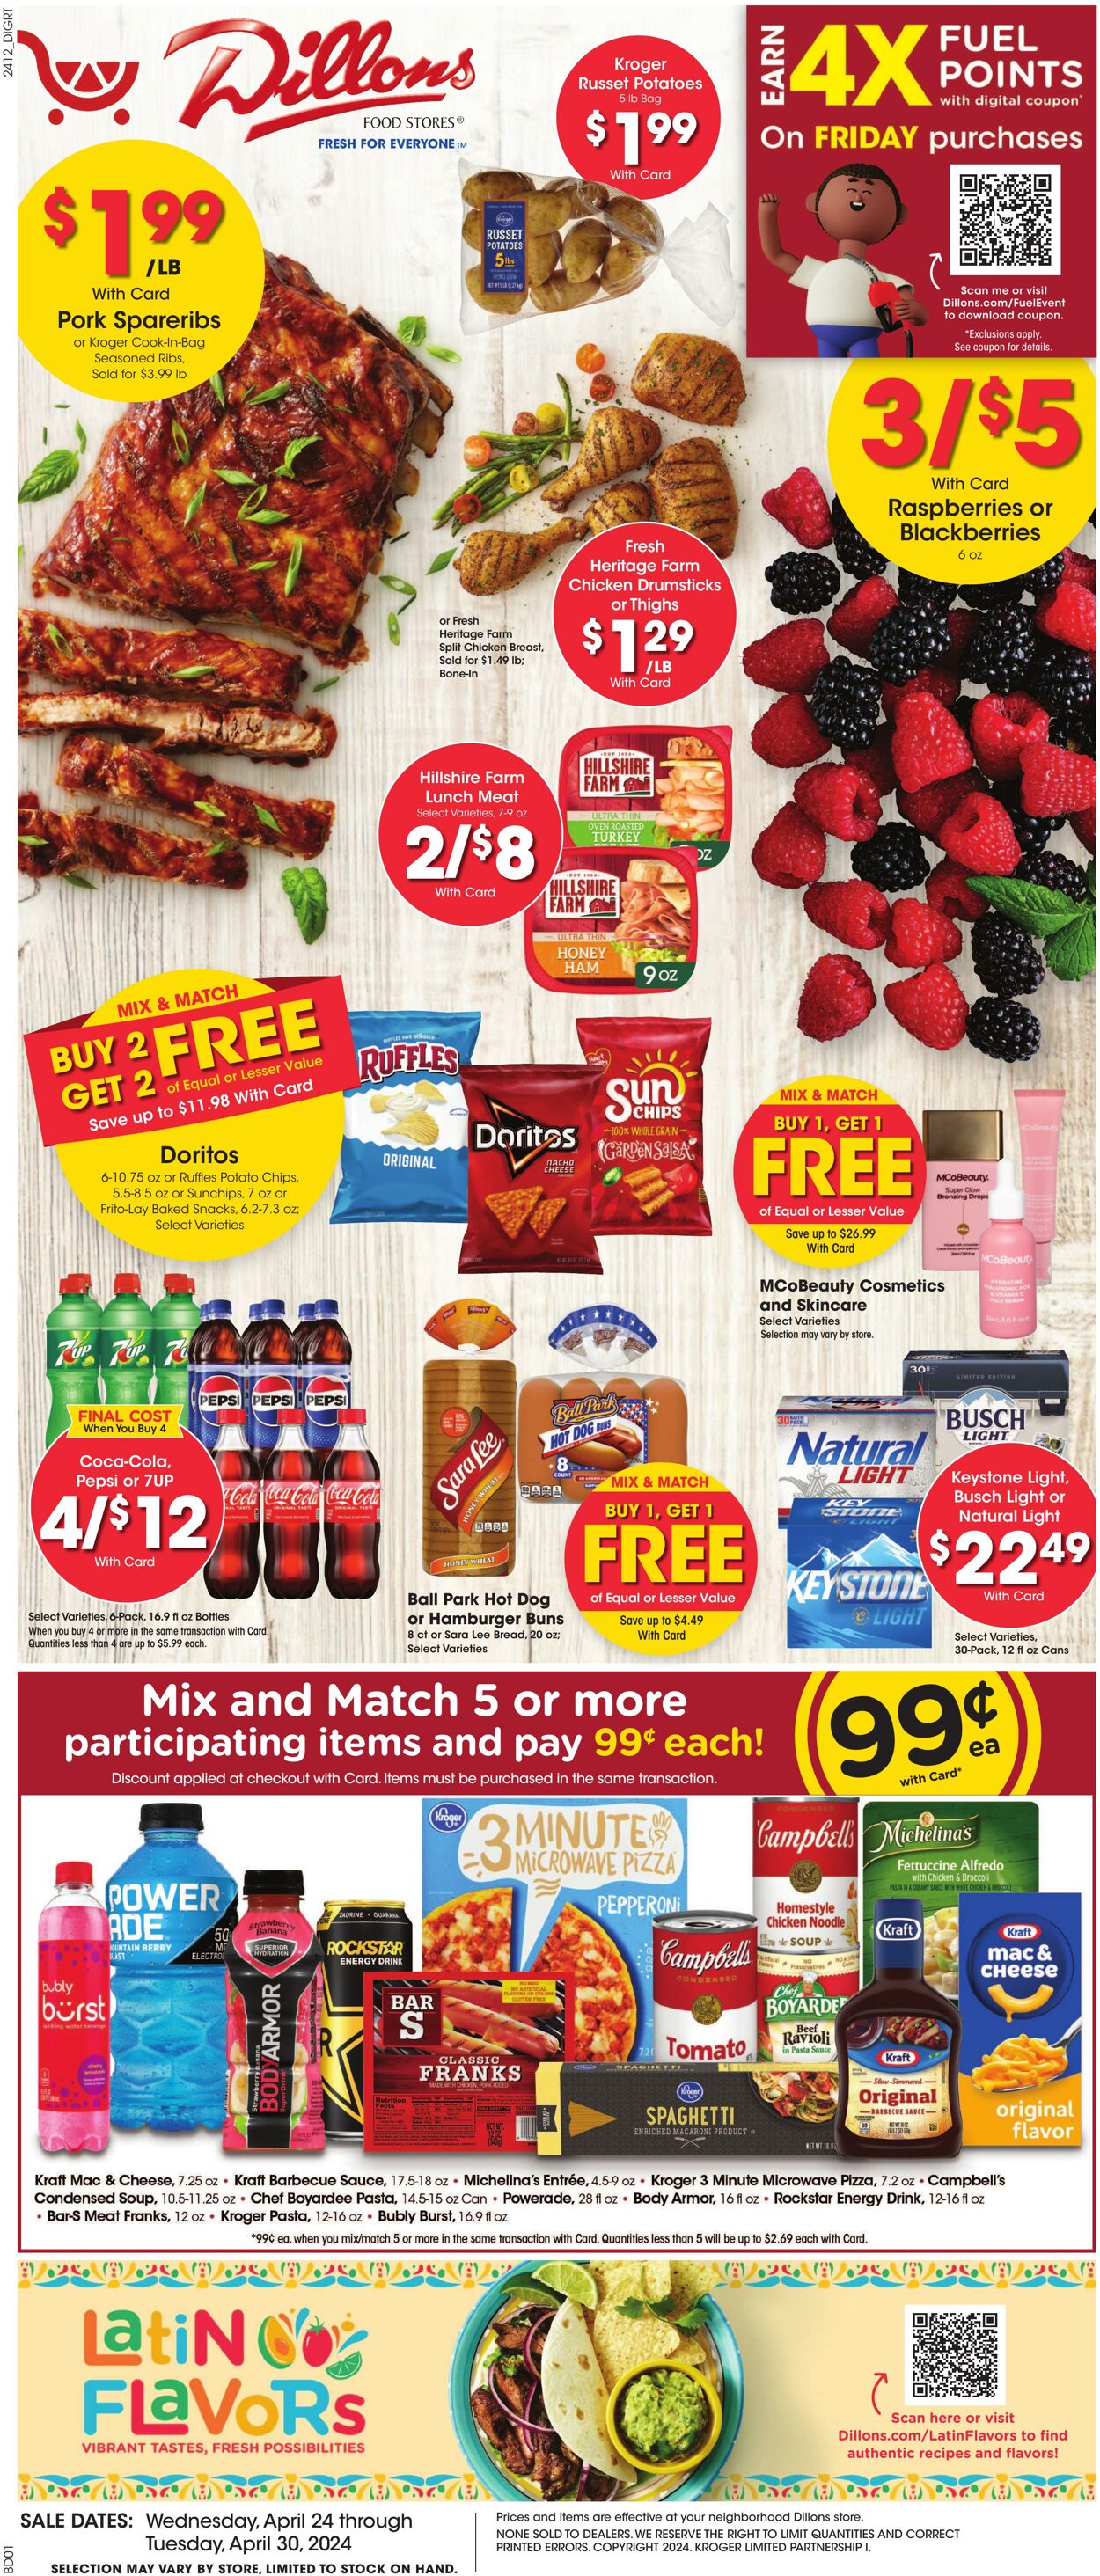 Dillons Promotional weekly ads